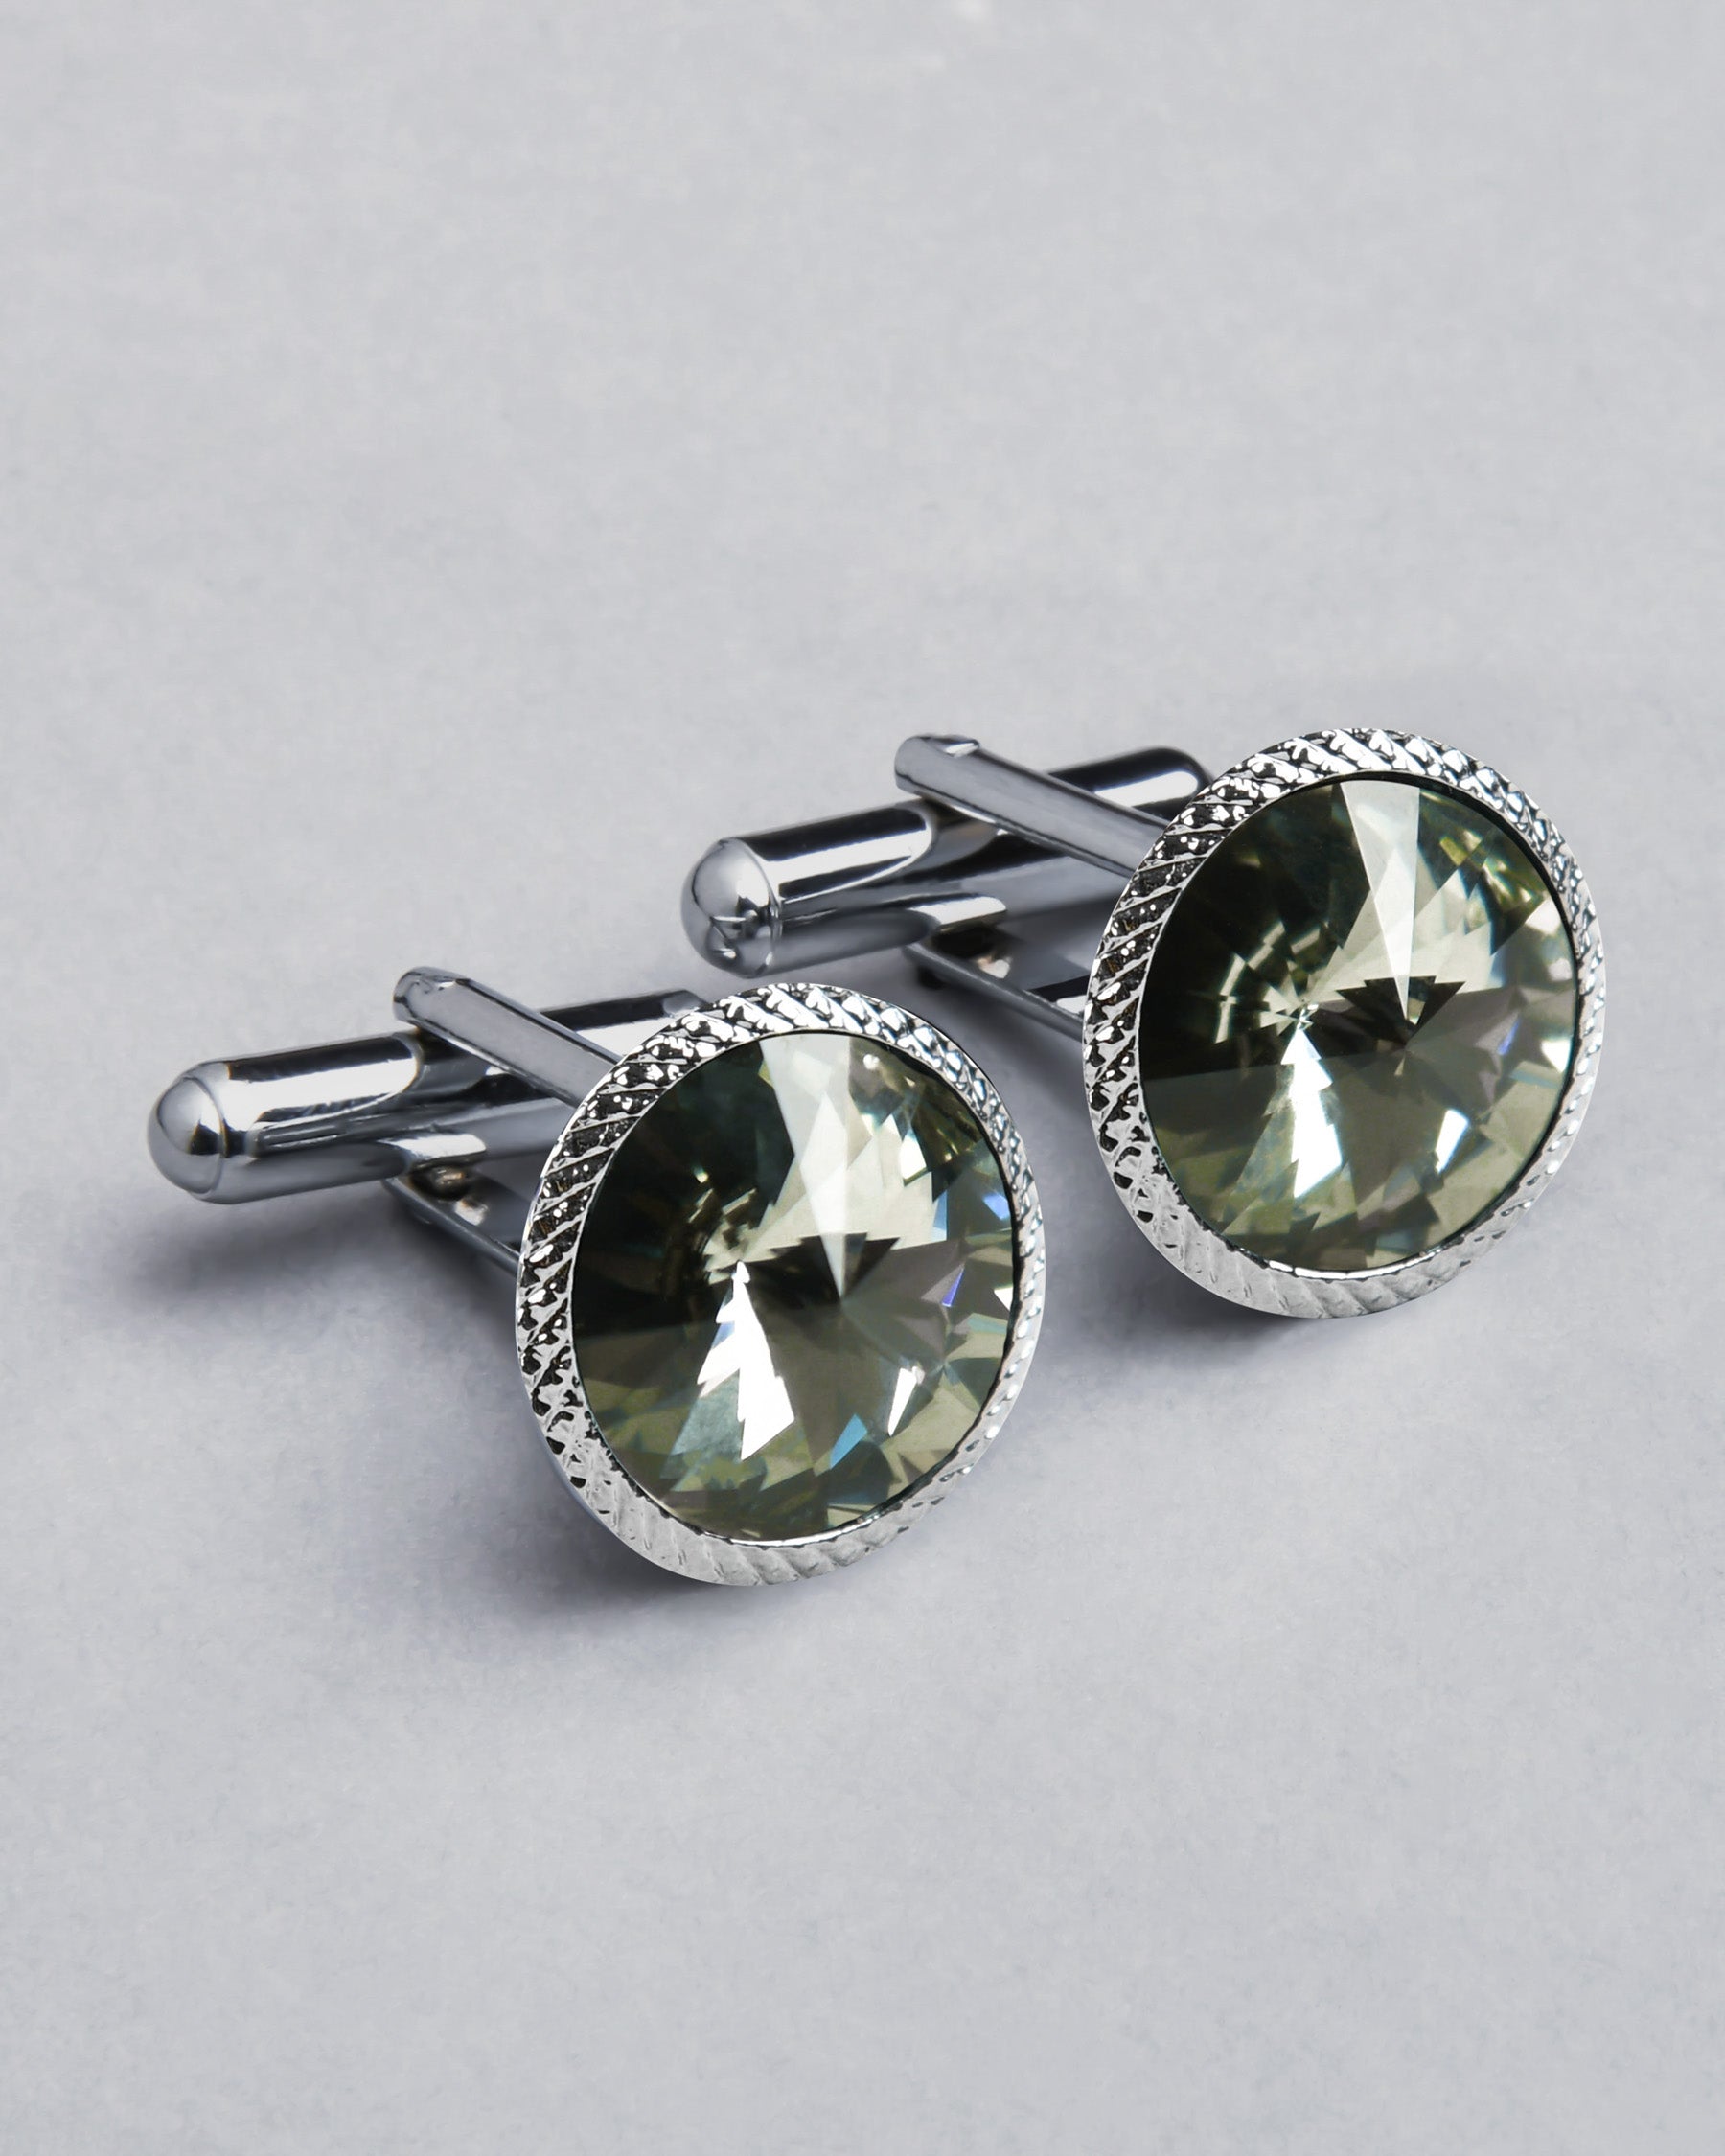 Silver with Border Engraved Grey Diamond Shaped Stone Cufflinks CL49